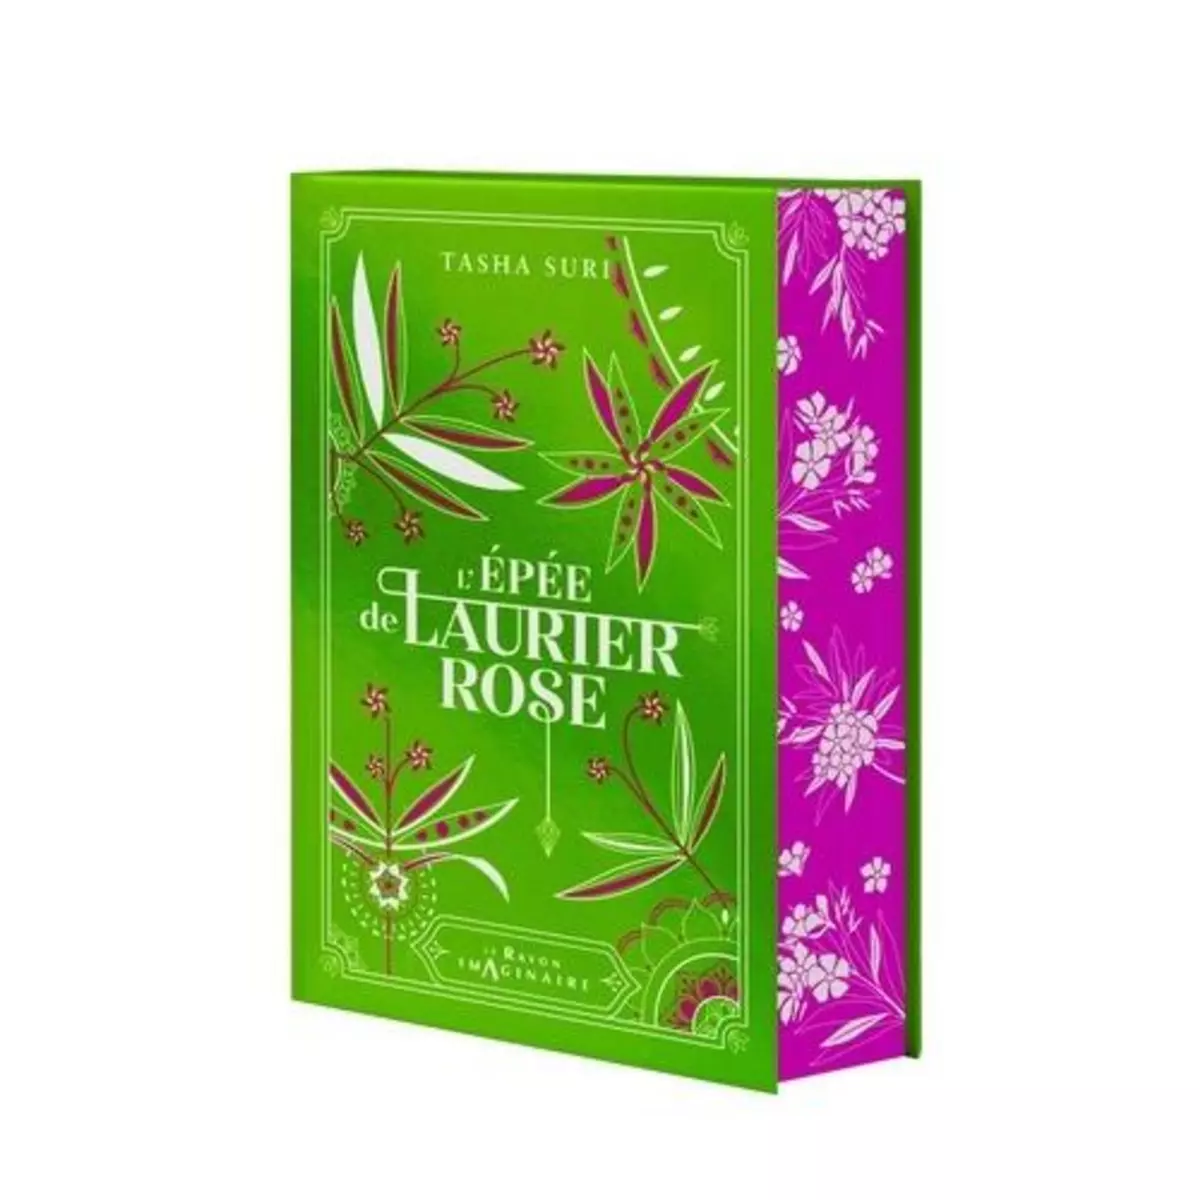  LES ROYAUMES ARDENTS TOME 2 : L'EPEE DE LAURIER ROSE. EDITION COLLECTOR, Suri Tasha